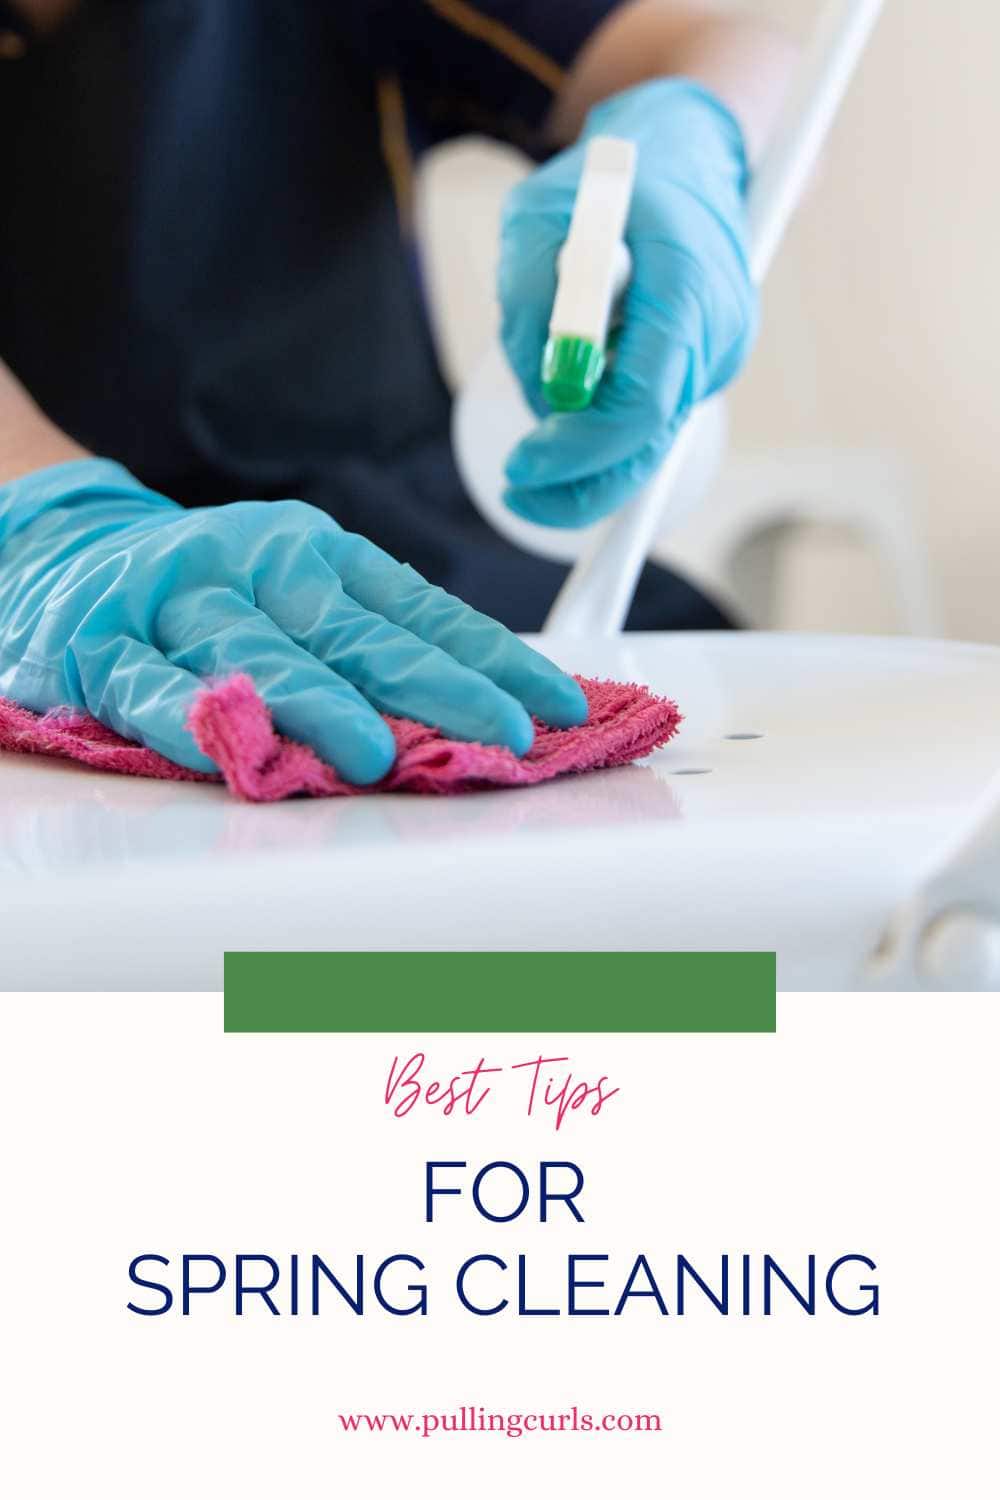 Today I am sharing my 3 best spring cleaning tips, that will hopefully make cleaning up your house a little easier. via @pullingcurls